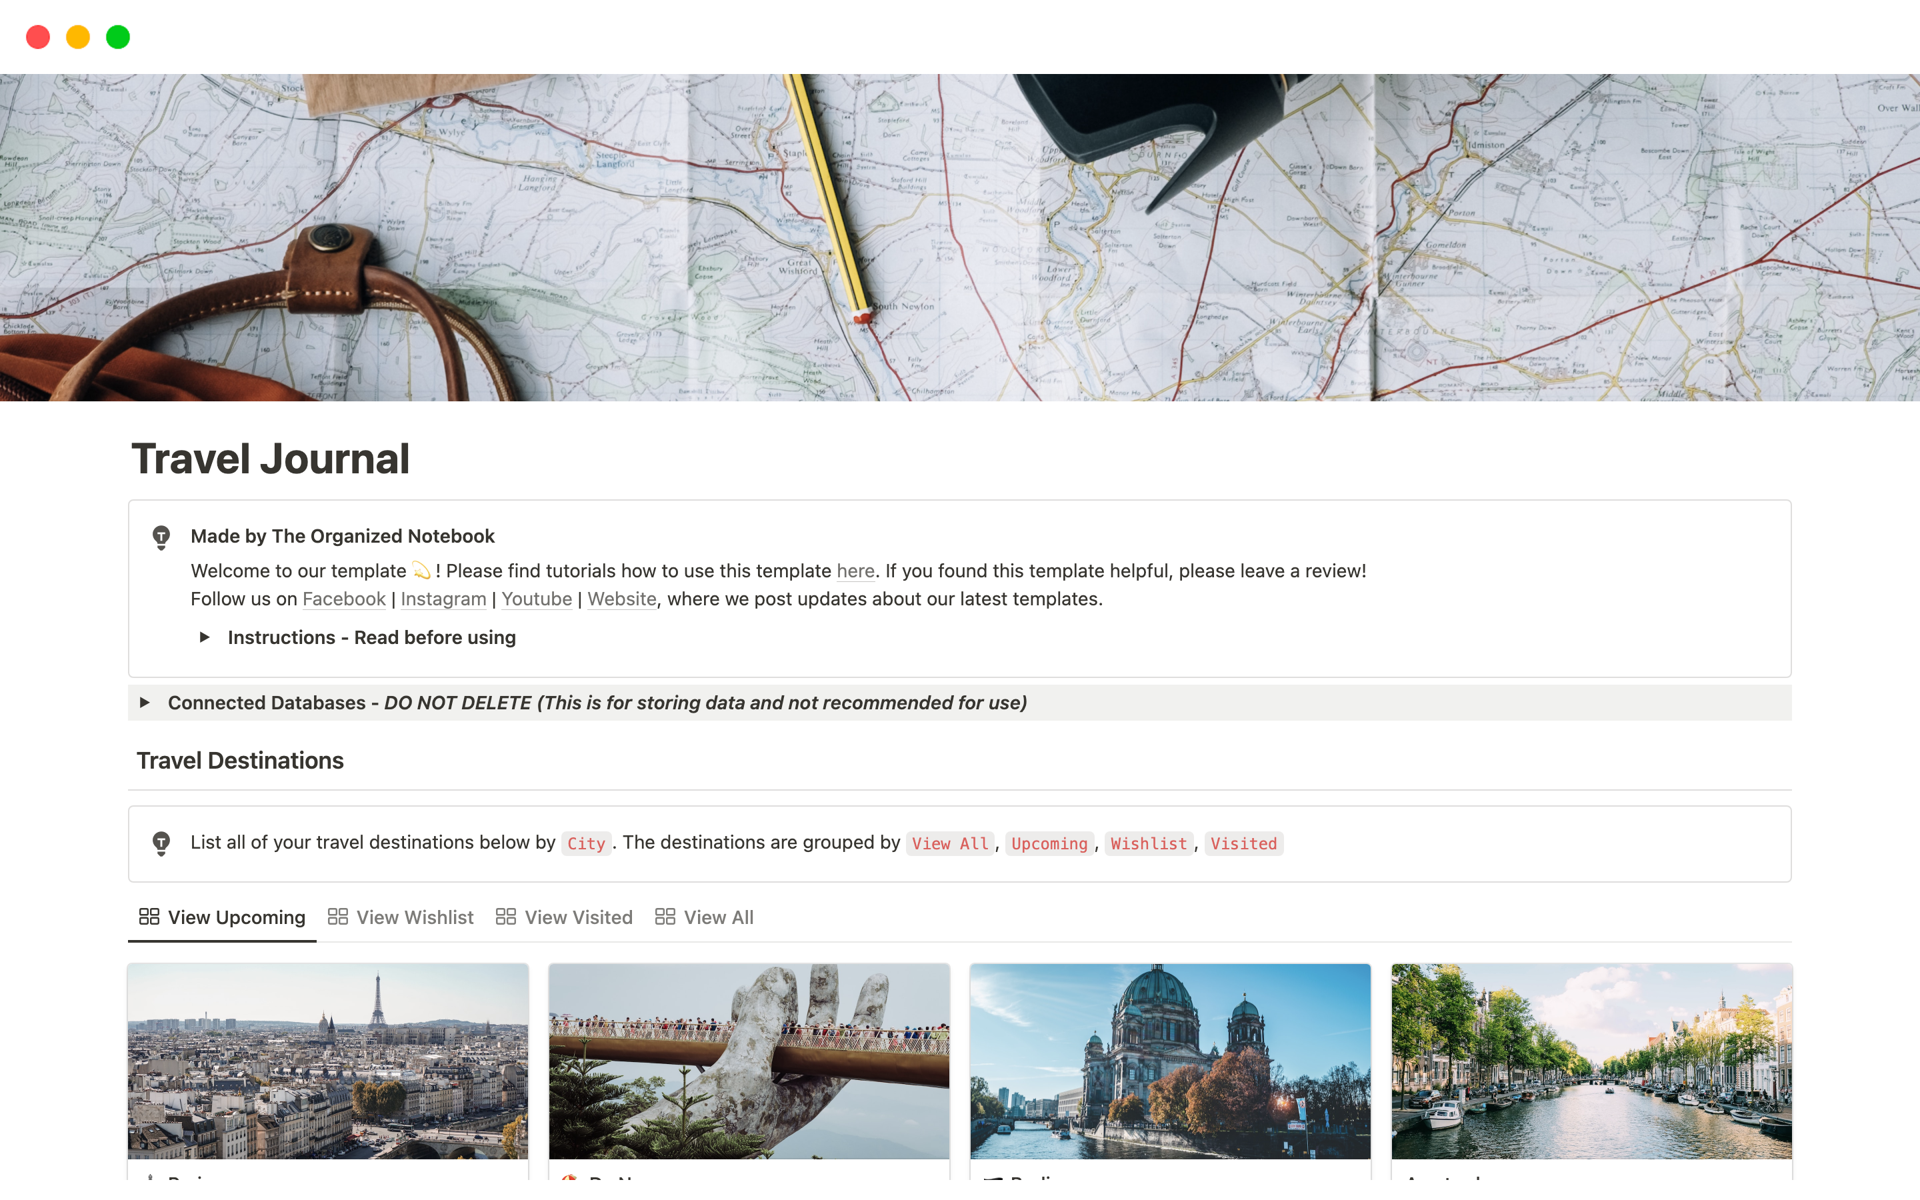 Our travel journal template is packed with features to accommodate every kind of traveler. 